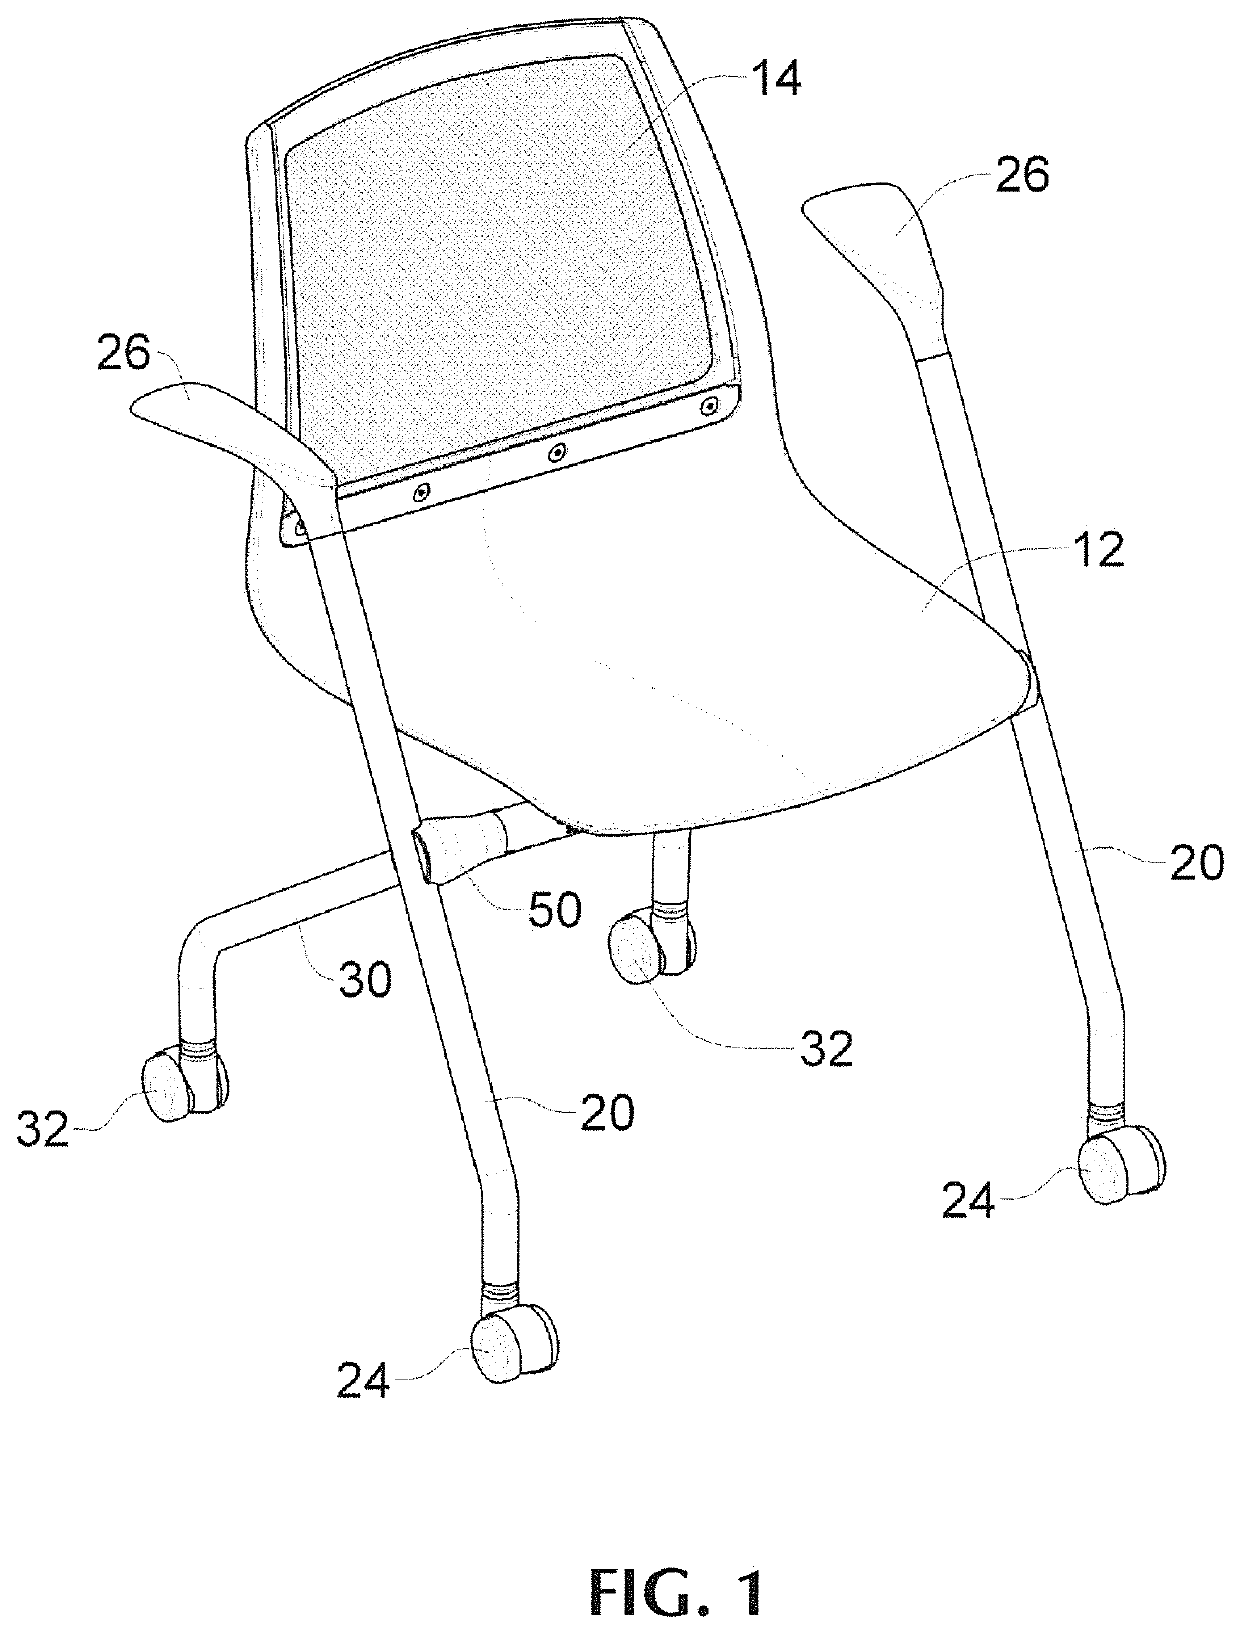 Assembly-type chair